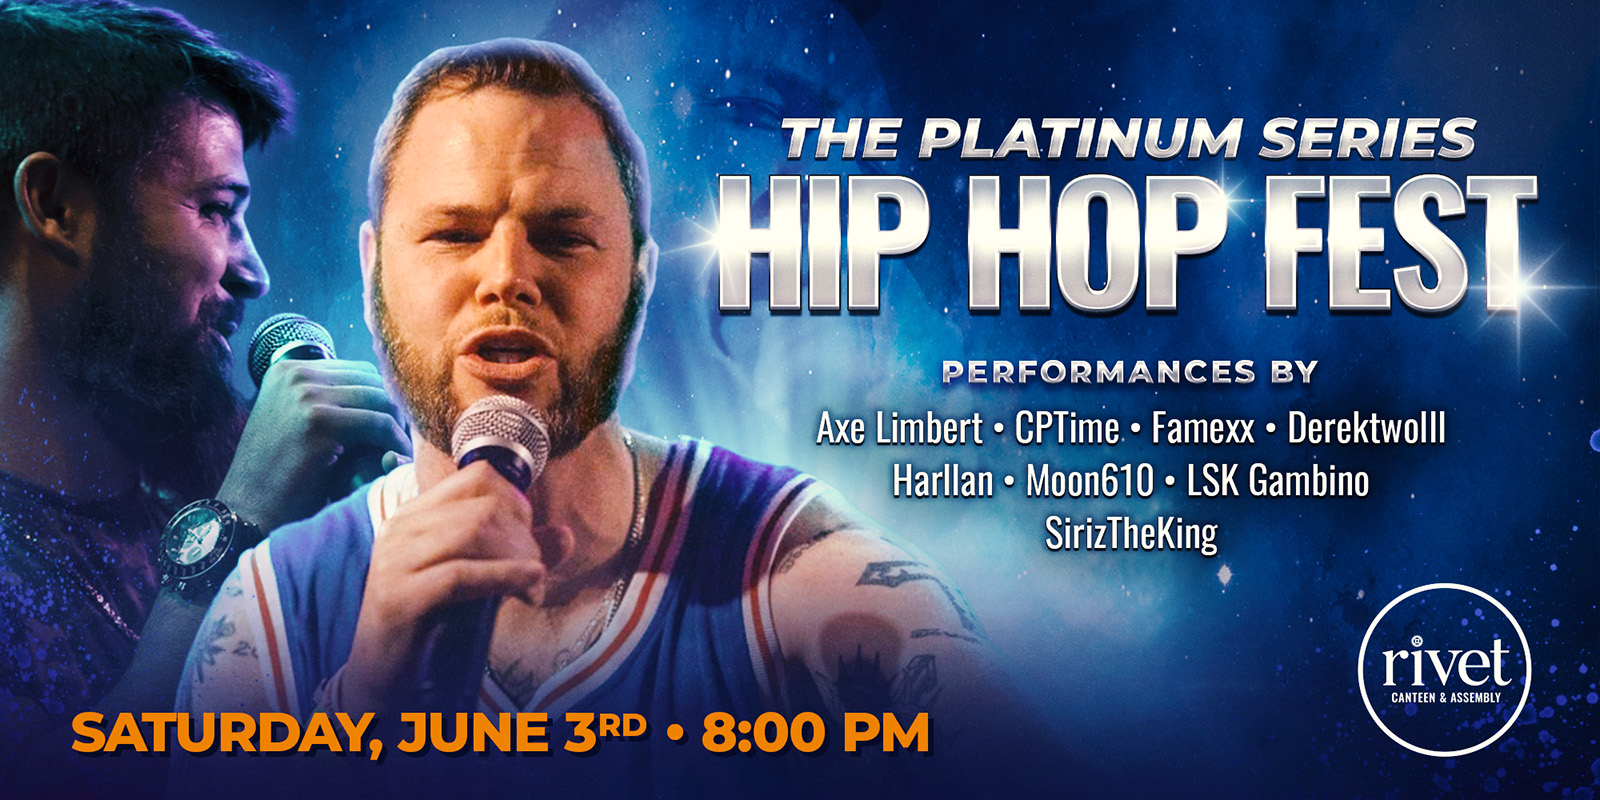 Get your tickets now and join us for The Platinum Series Hip Hop Fest at Rivet: Canteen & Assembly on Saturday, June 3rd, 2023!